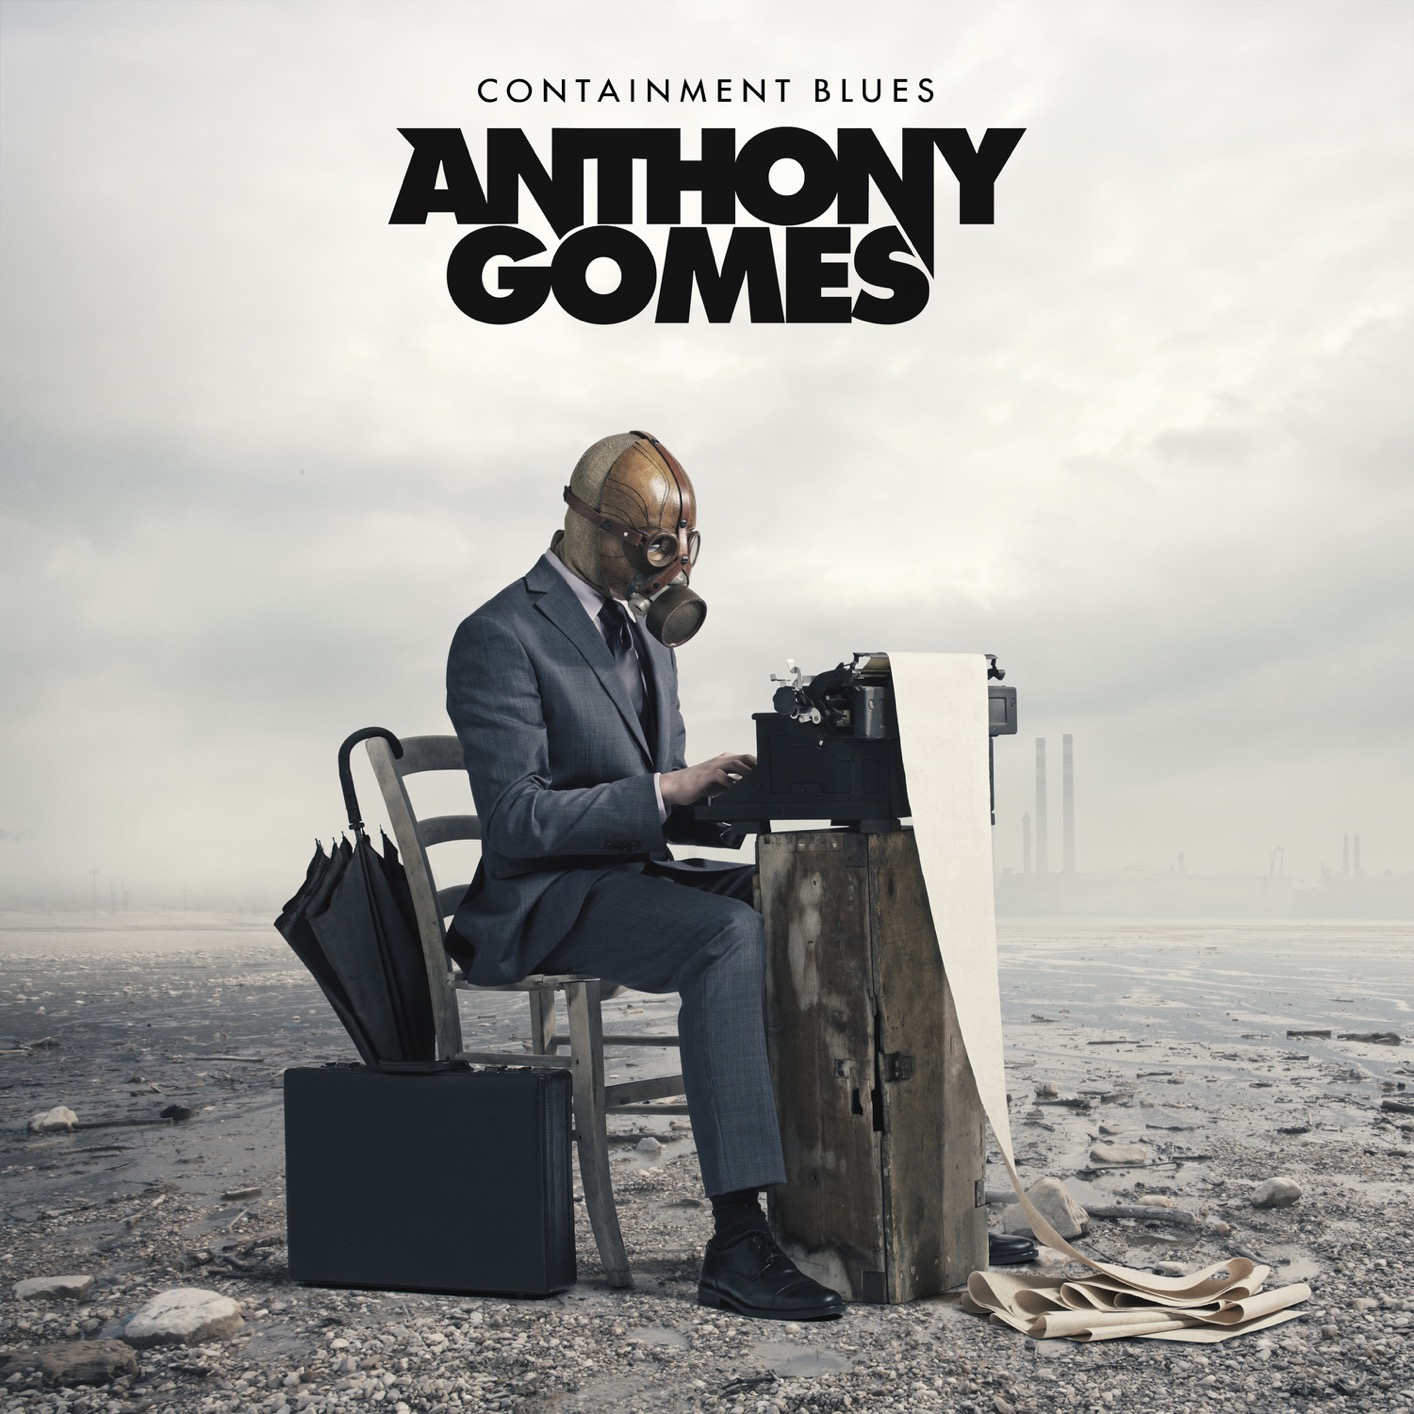 Anthony Gomes - Containment Blues (2020) [FLAC 24bit/48kHz]